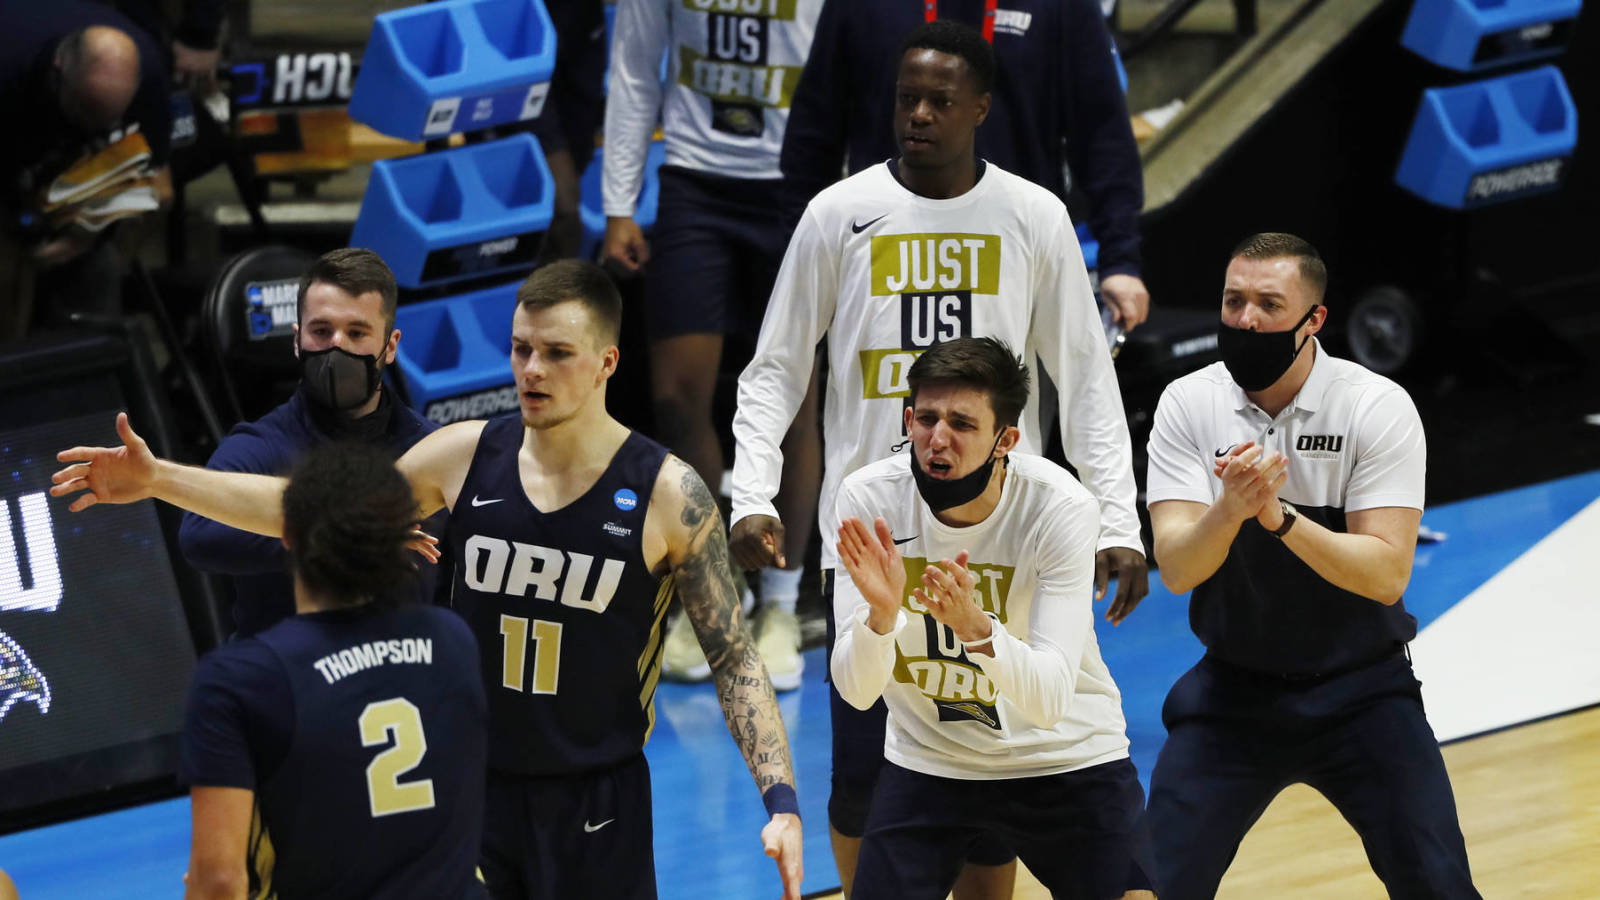 Oral Roberts asks to be verified on Twitter after win vs. OSU | Yardbarker